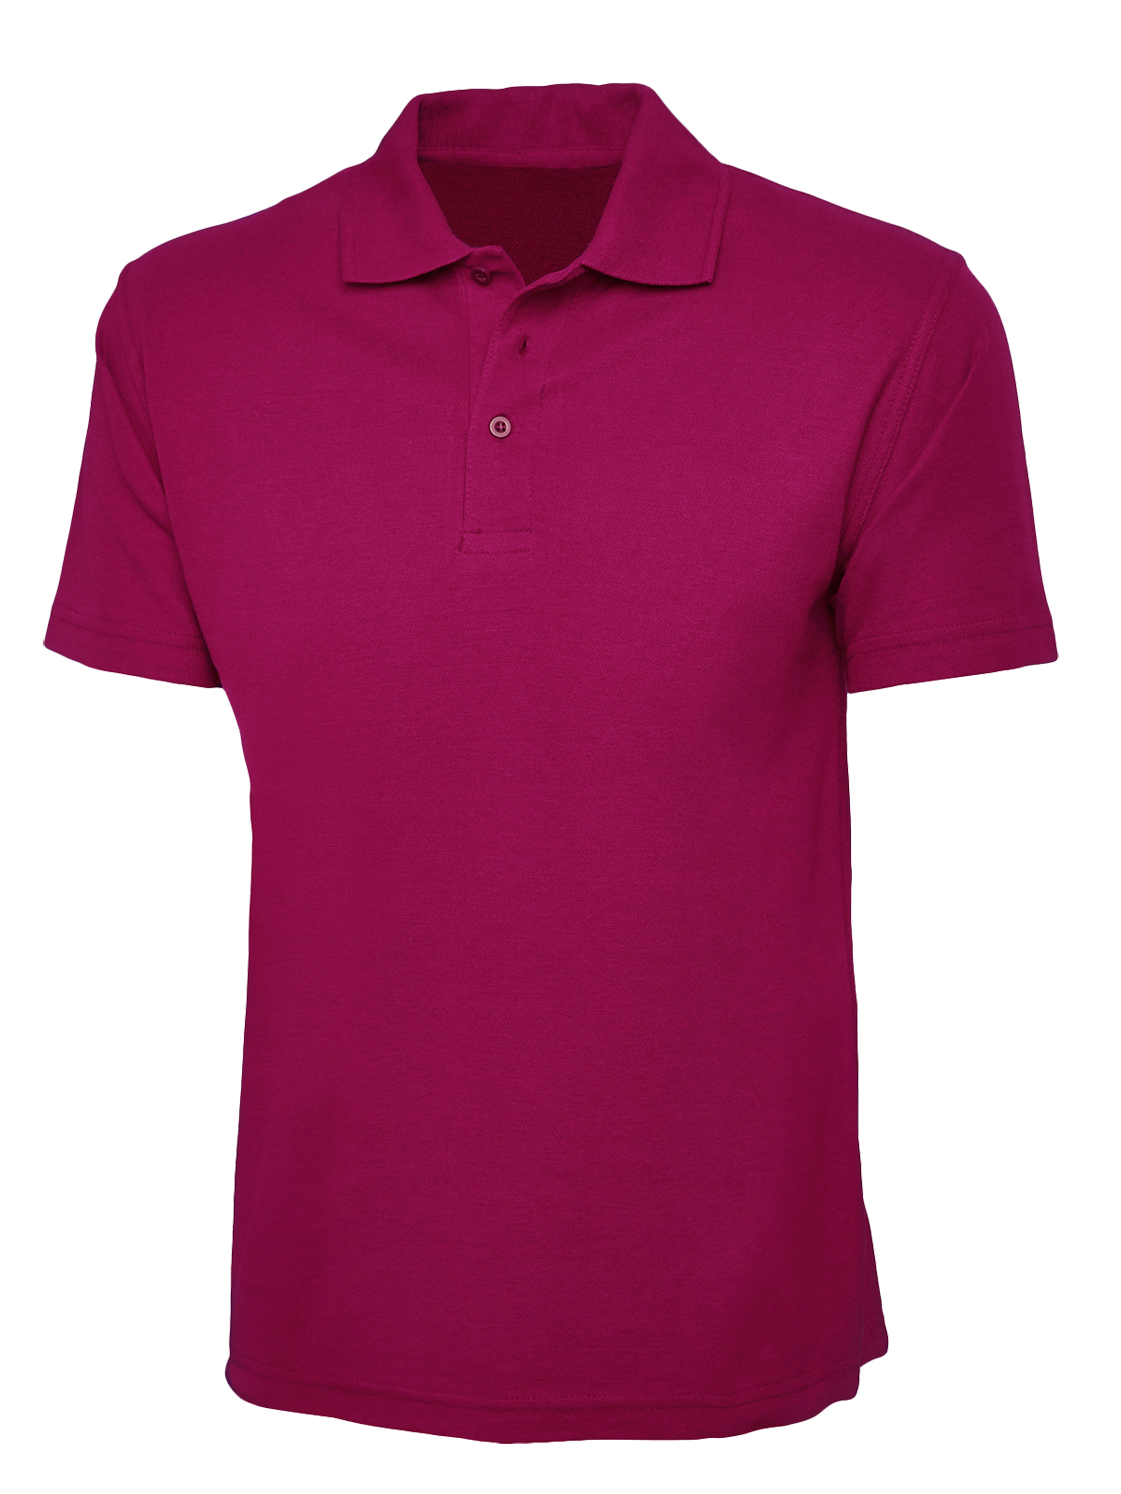 Blank Pink Polo Shirt Front And Back View Isolated Wh - vrogue.co